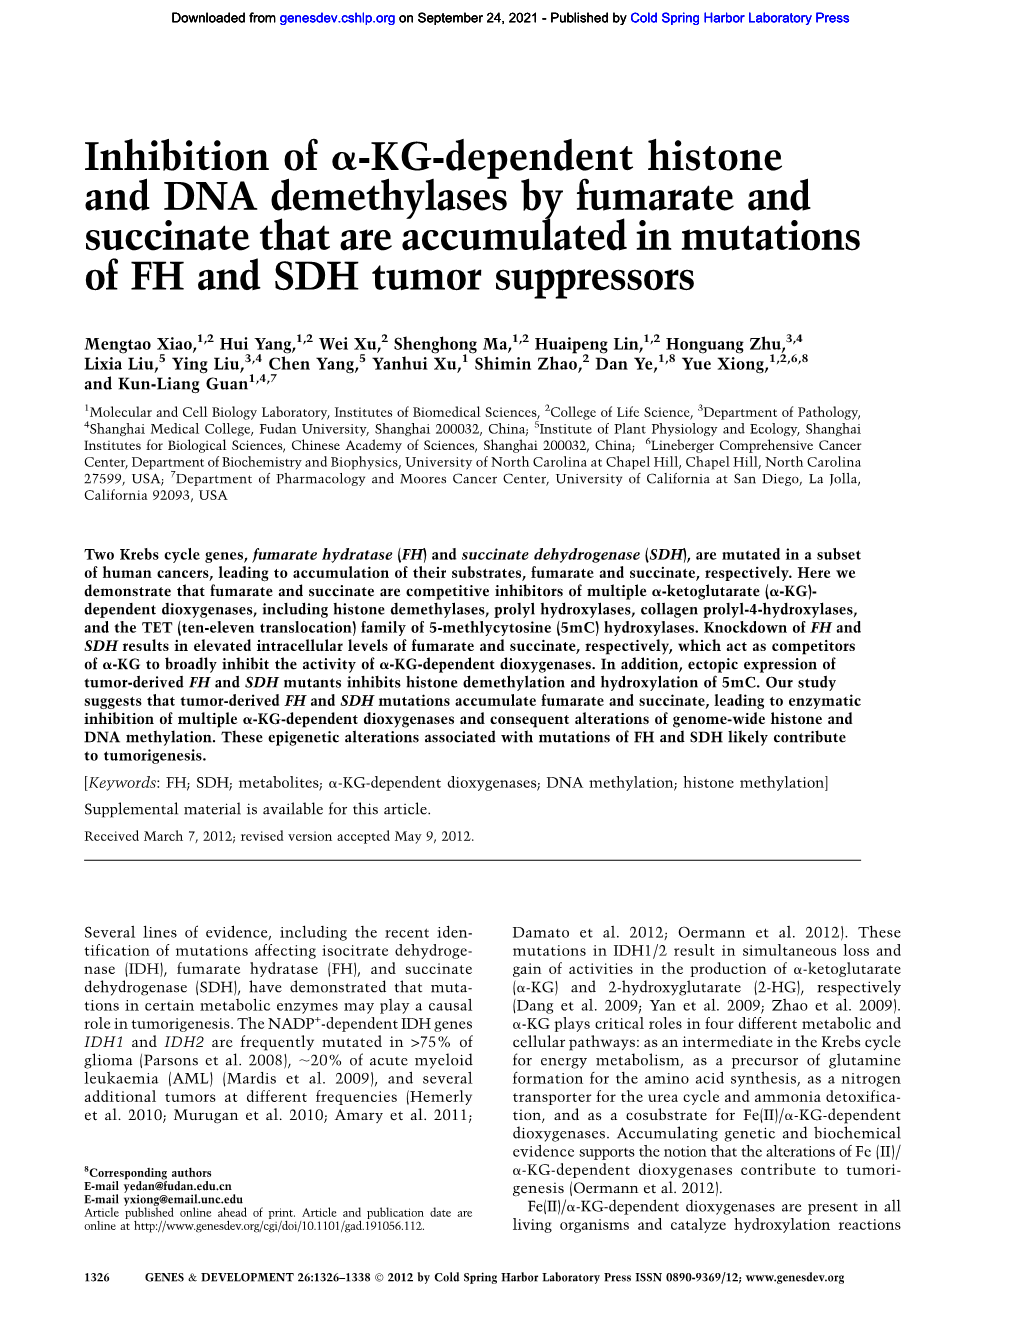 Inhibition of A-KG-Dependent Histone and DNA Demethylases by Fumarate and Succinate That Are Accumulated in Mutations of FH and SDH Tumor Suppressors